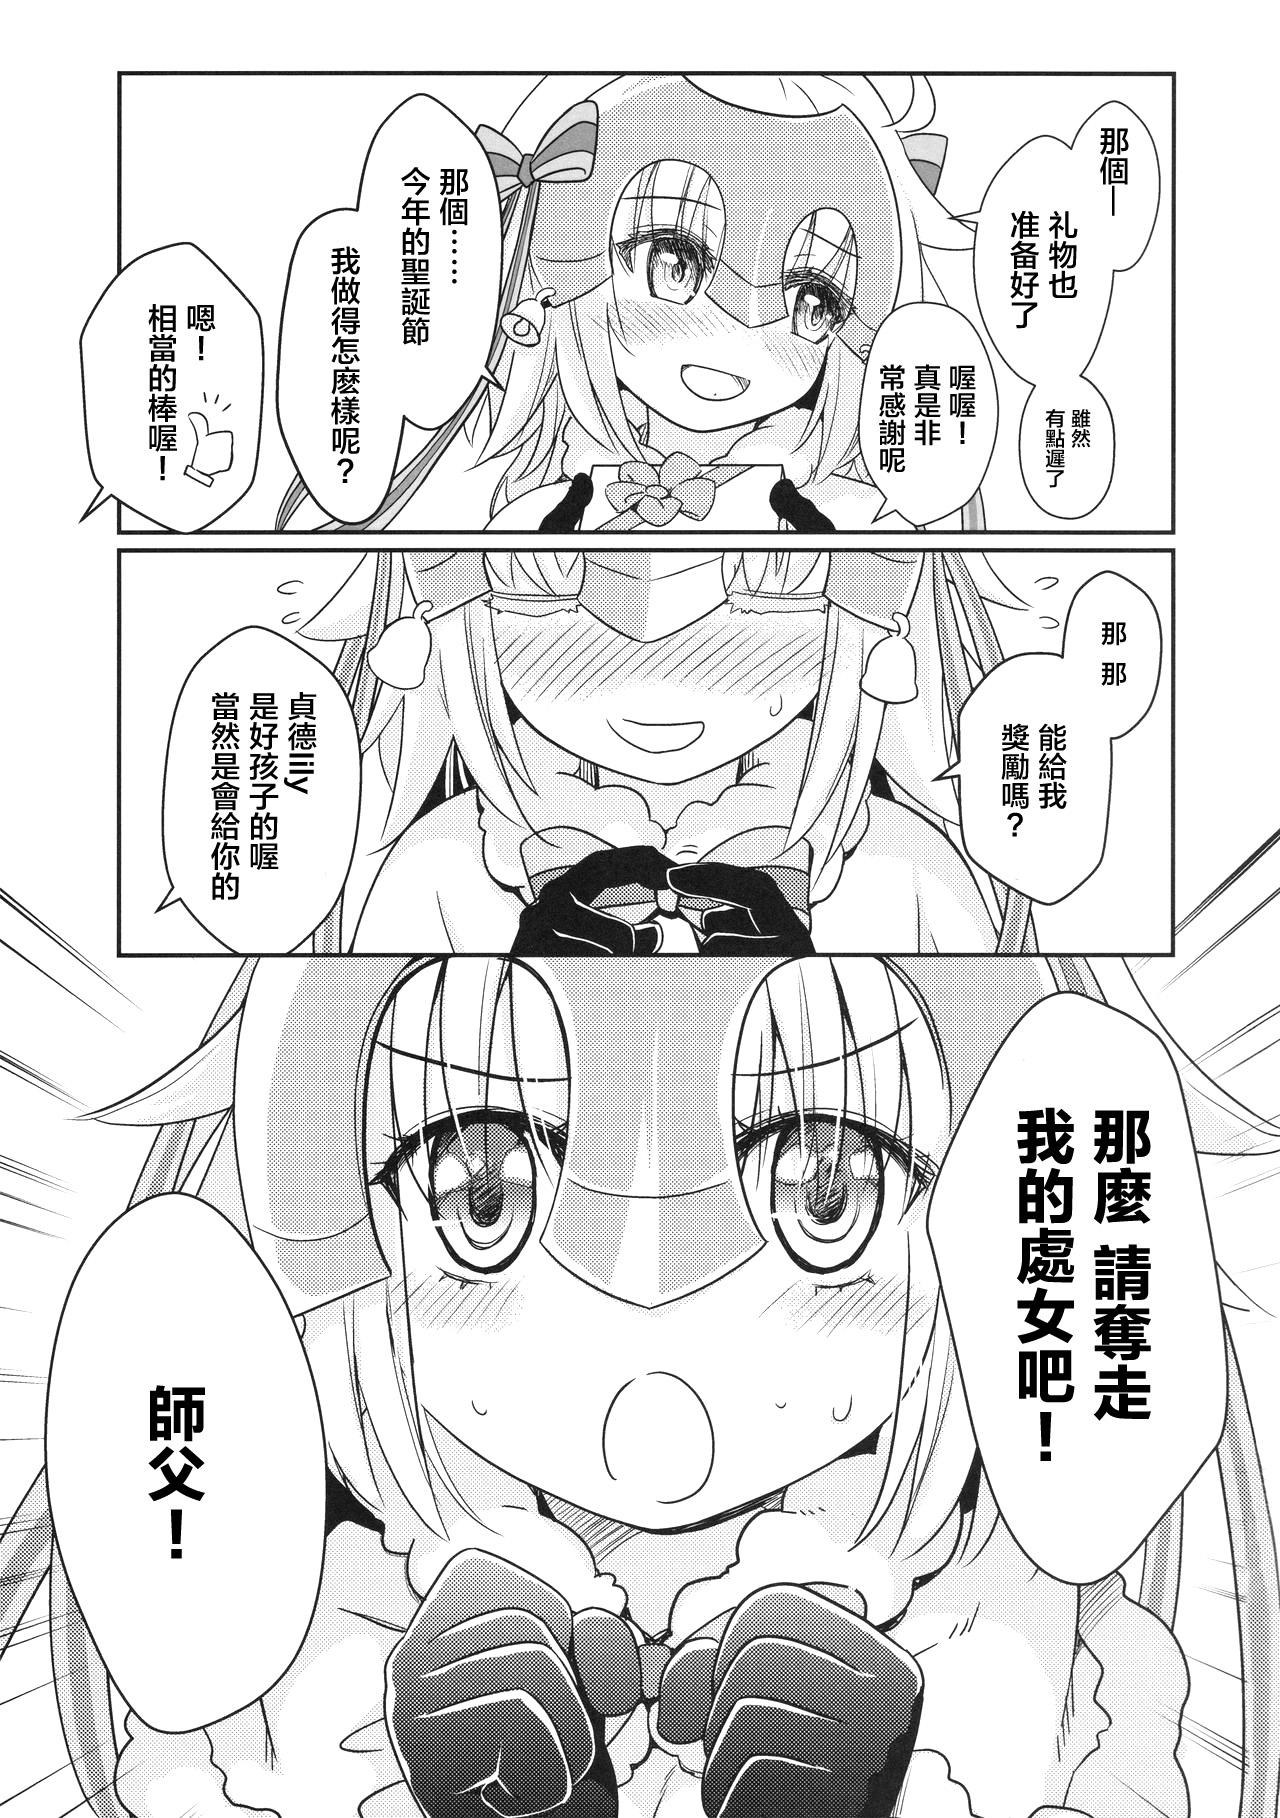 Consolo Jeanne Lily wa Yoiko? - Fate grand order Gay Pawnshop - Page 3